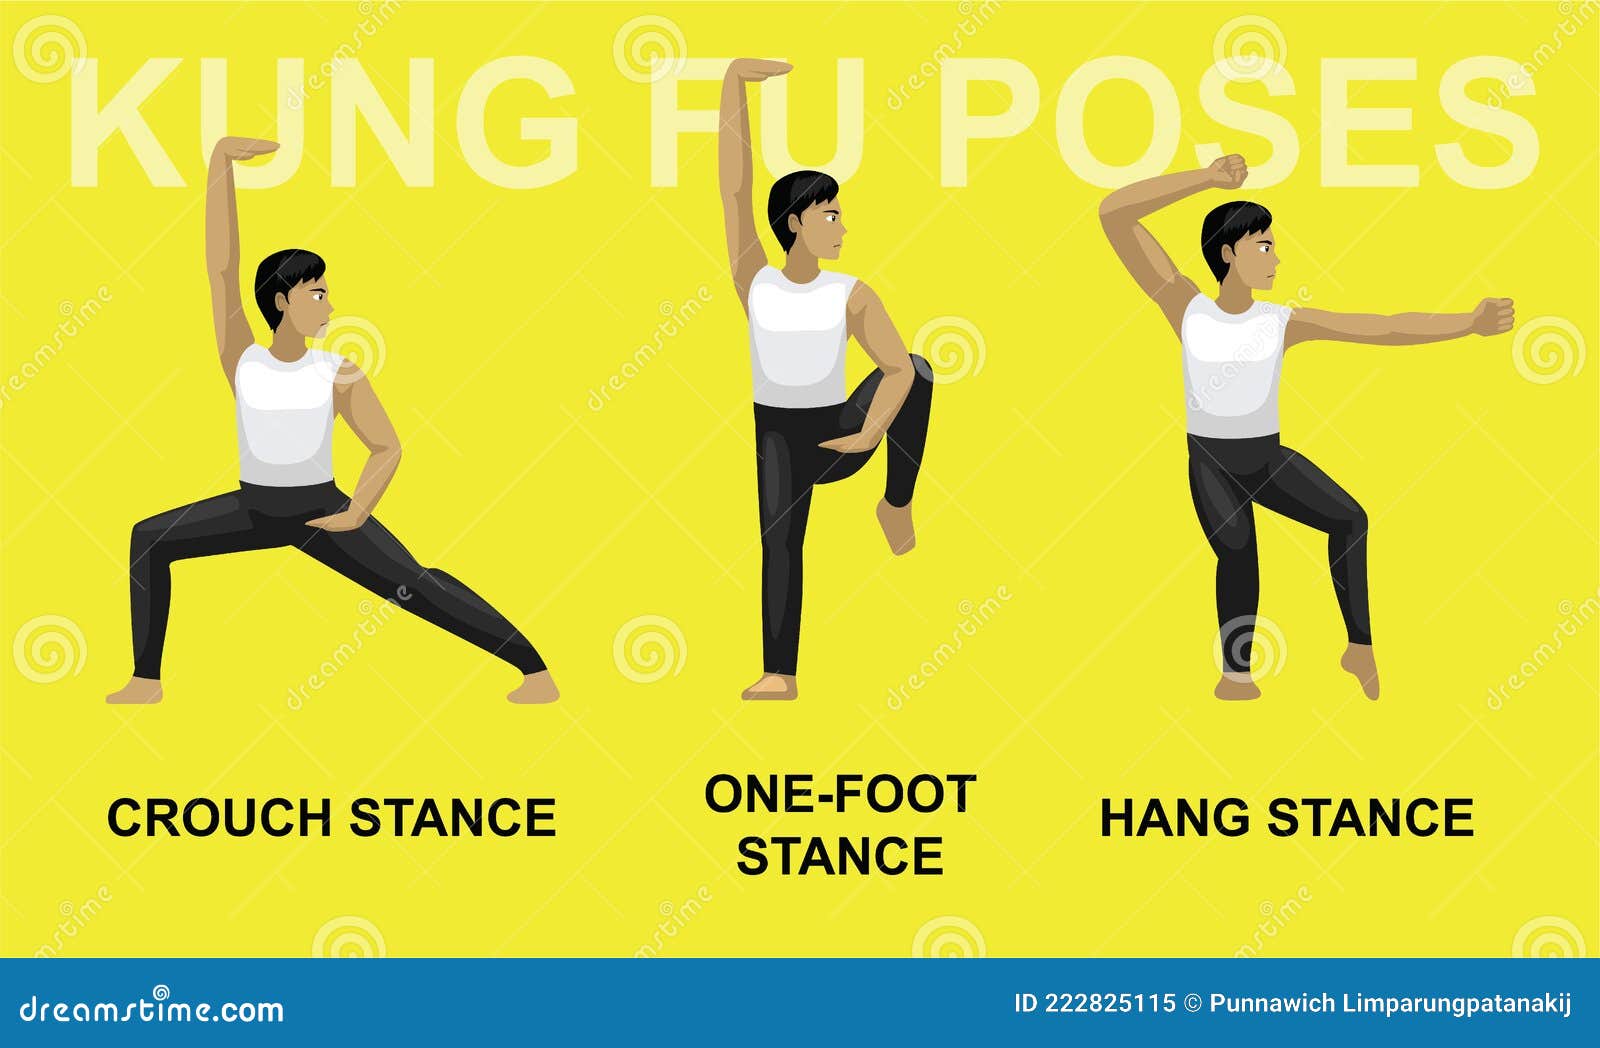 Kung Fu Poses Crouch Stance One-Foot Hang Cartoon Vector Illustration Stock  Vector - Illustration of strength, karate: 222825115